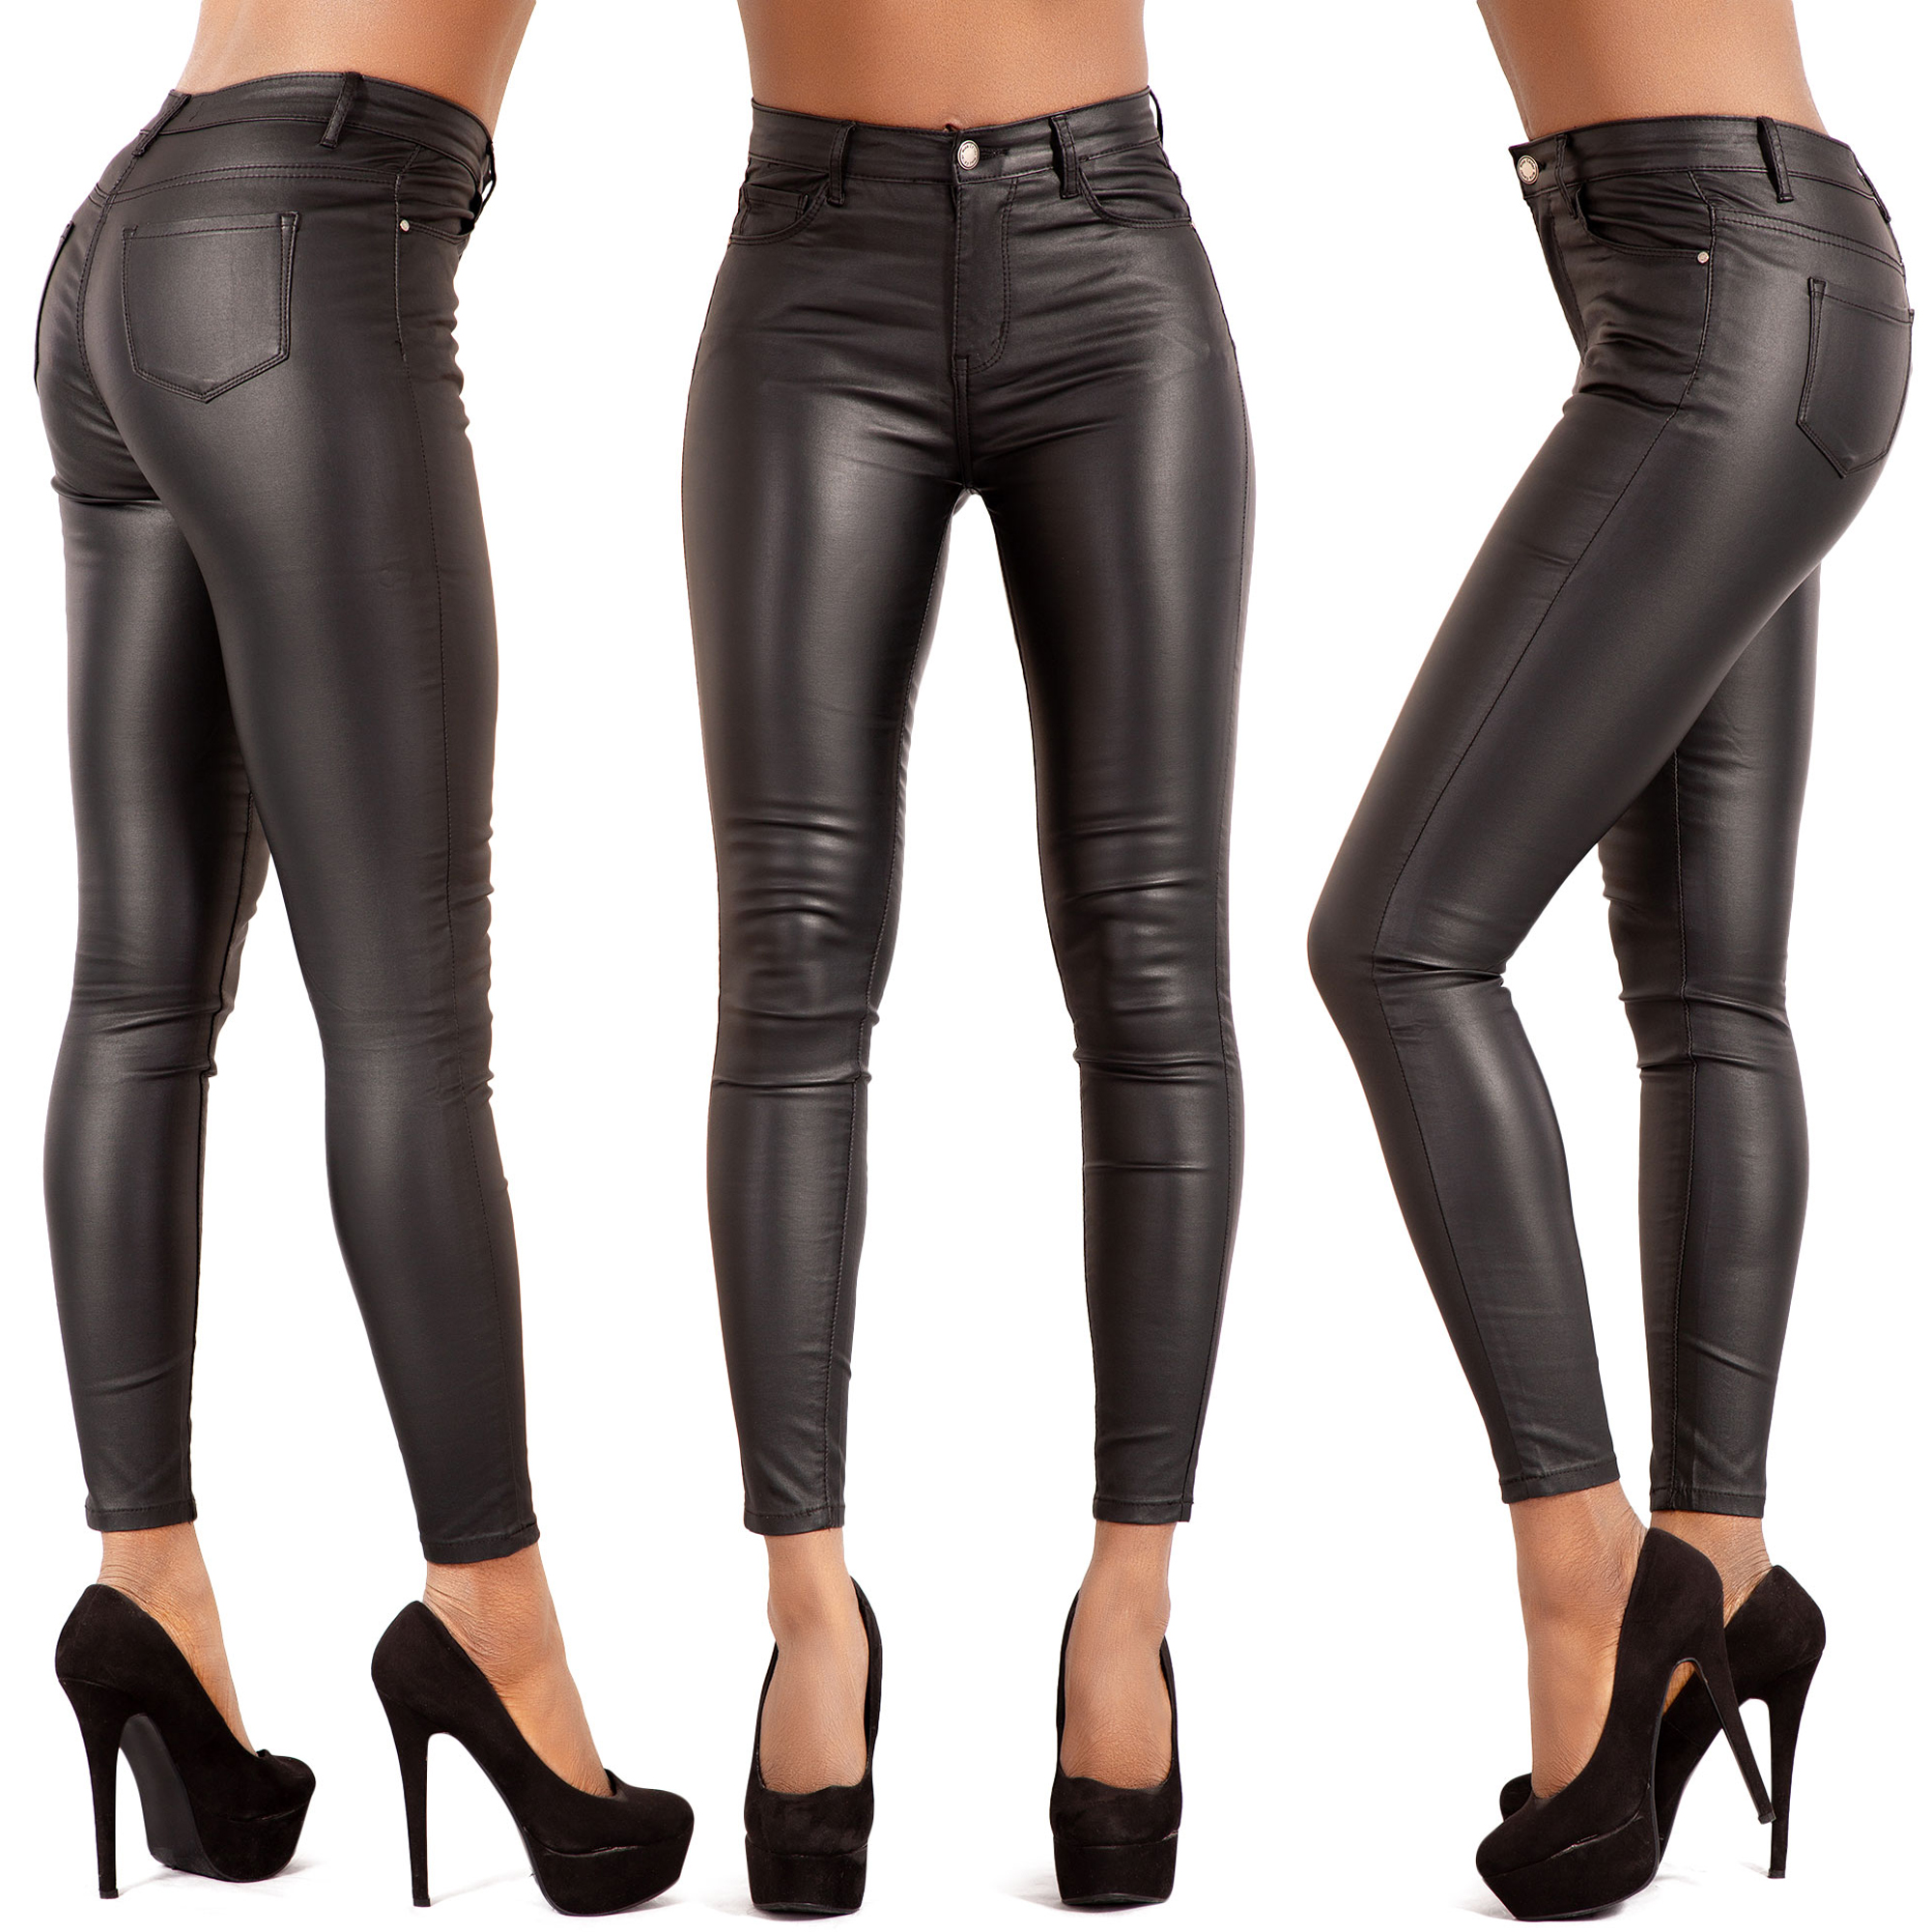 Women Black Leather Pants/ High Waisted Leather Leggings for Women